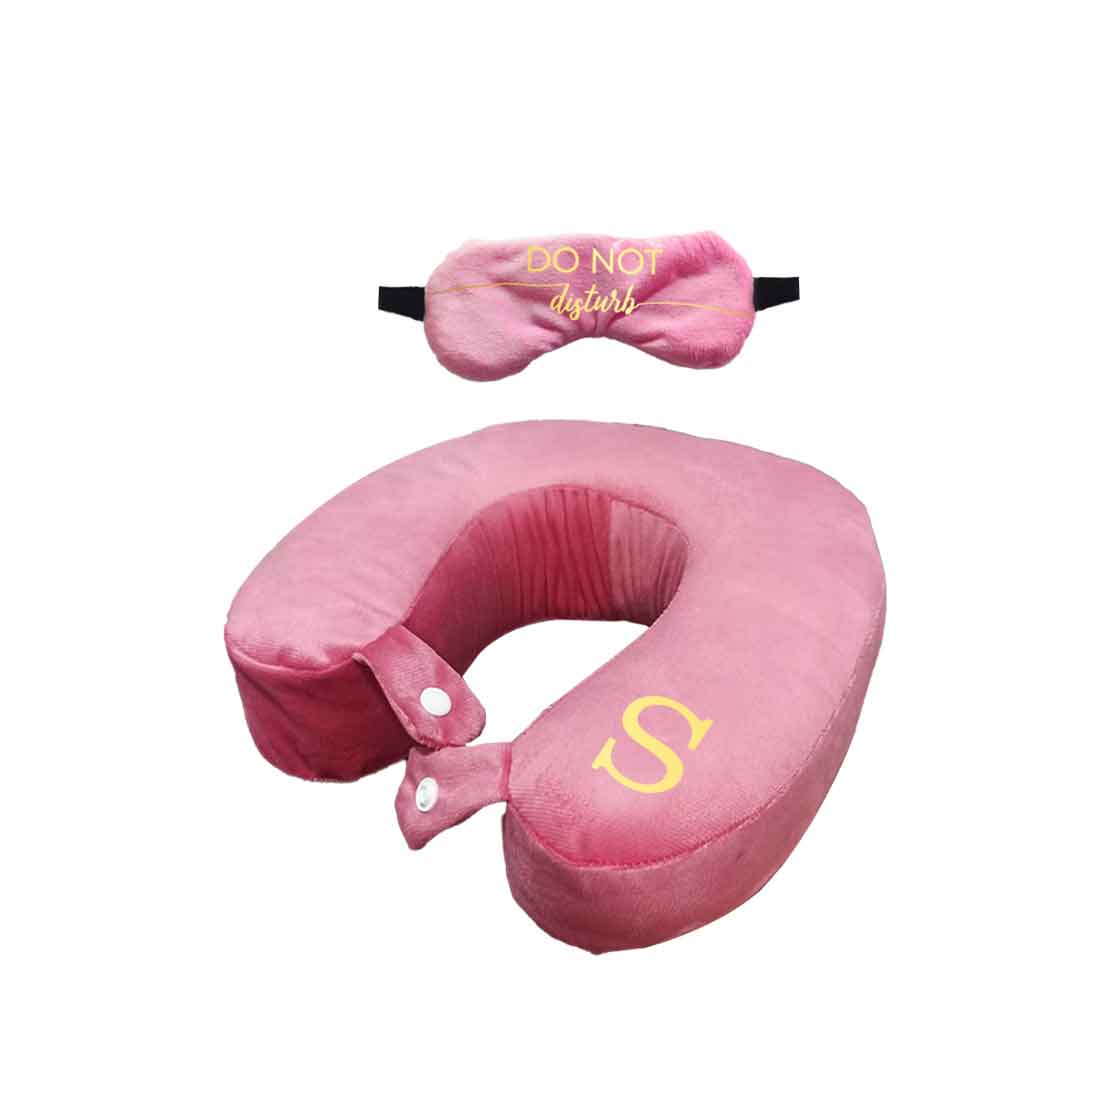 Personalized Neck Supporting Pillows with Name for Sleeping on Flights